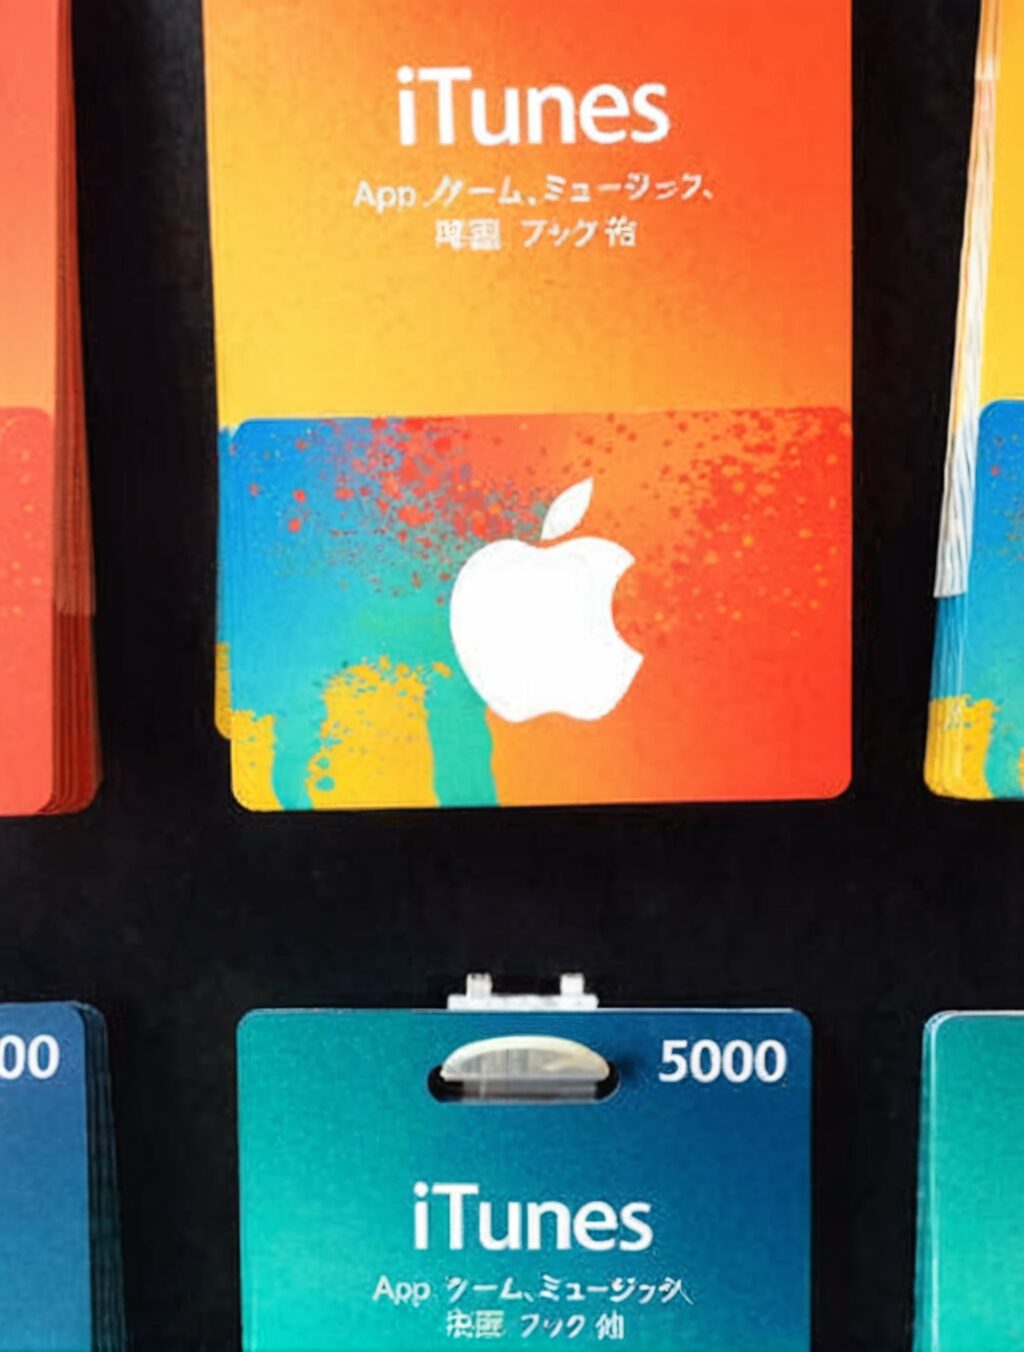 does japan have gift card